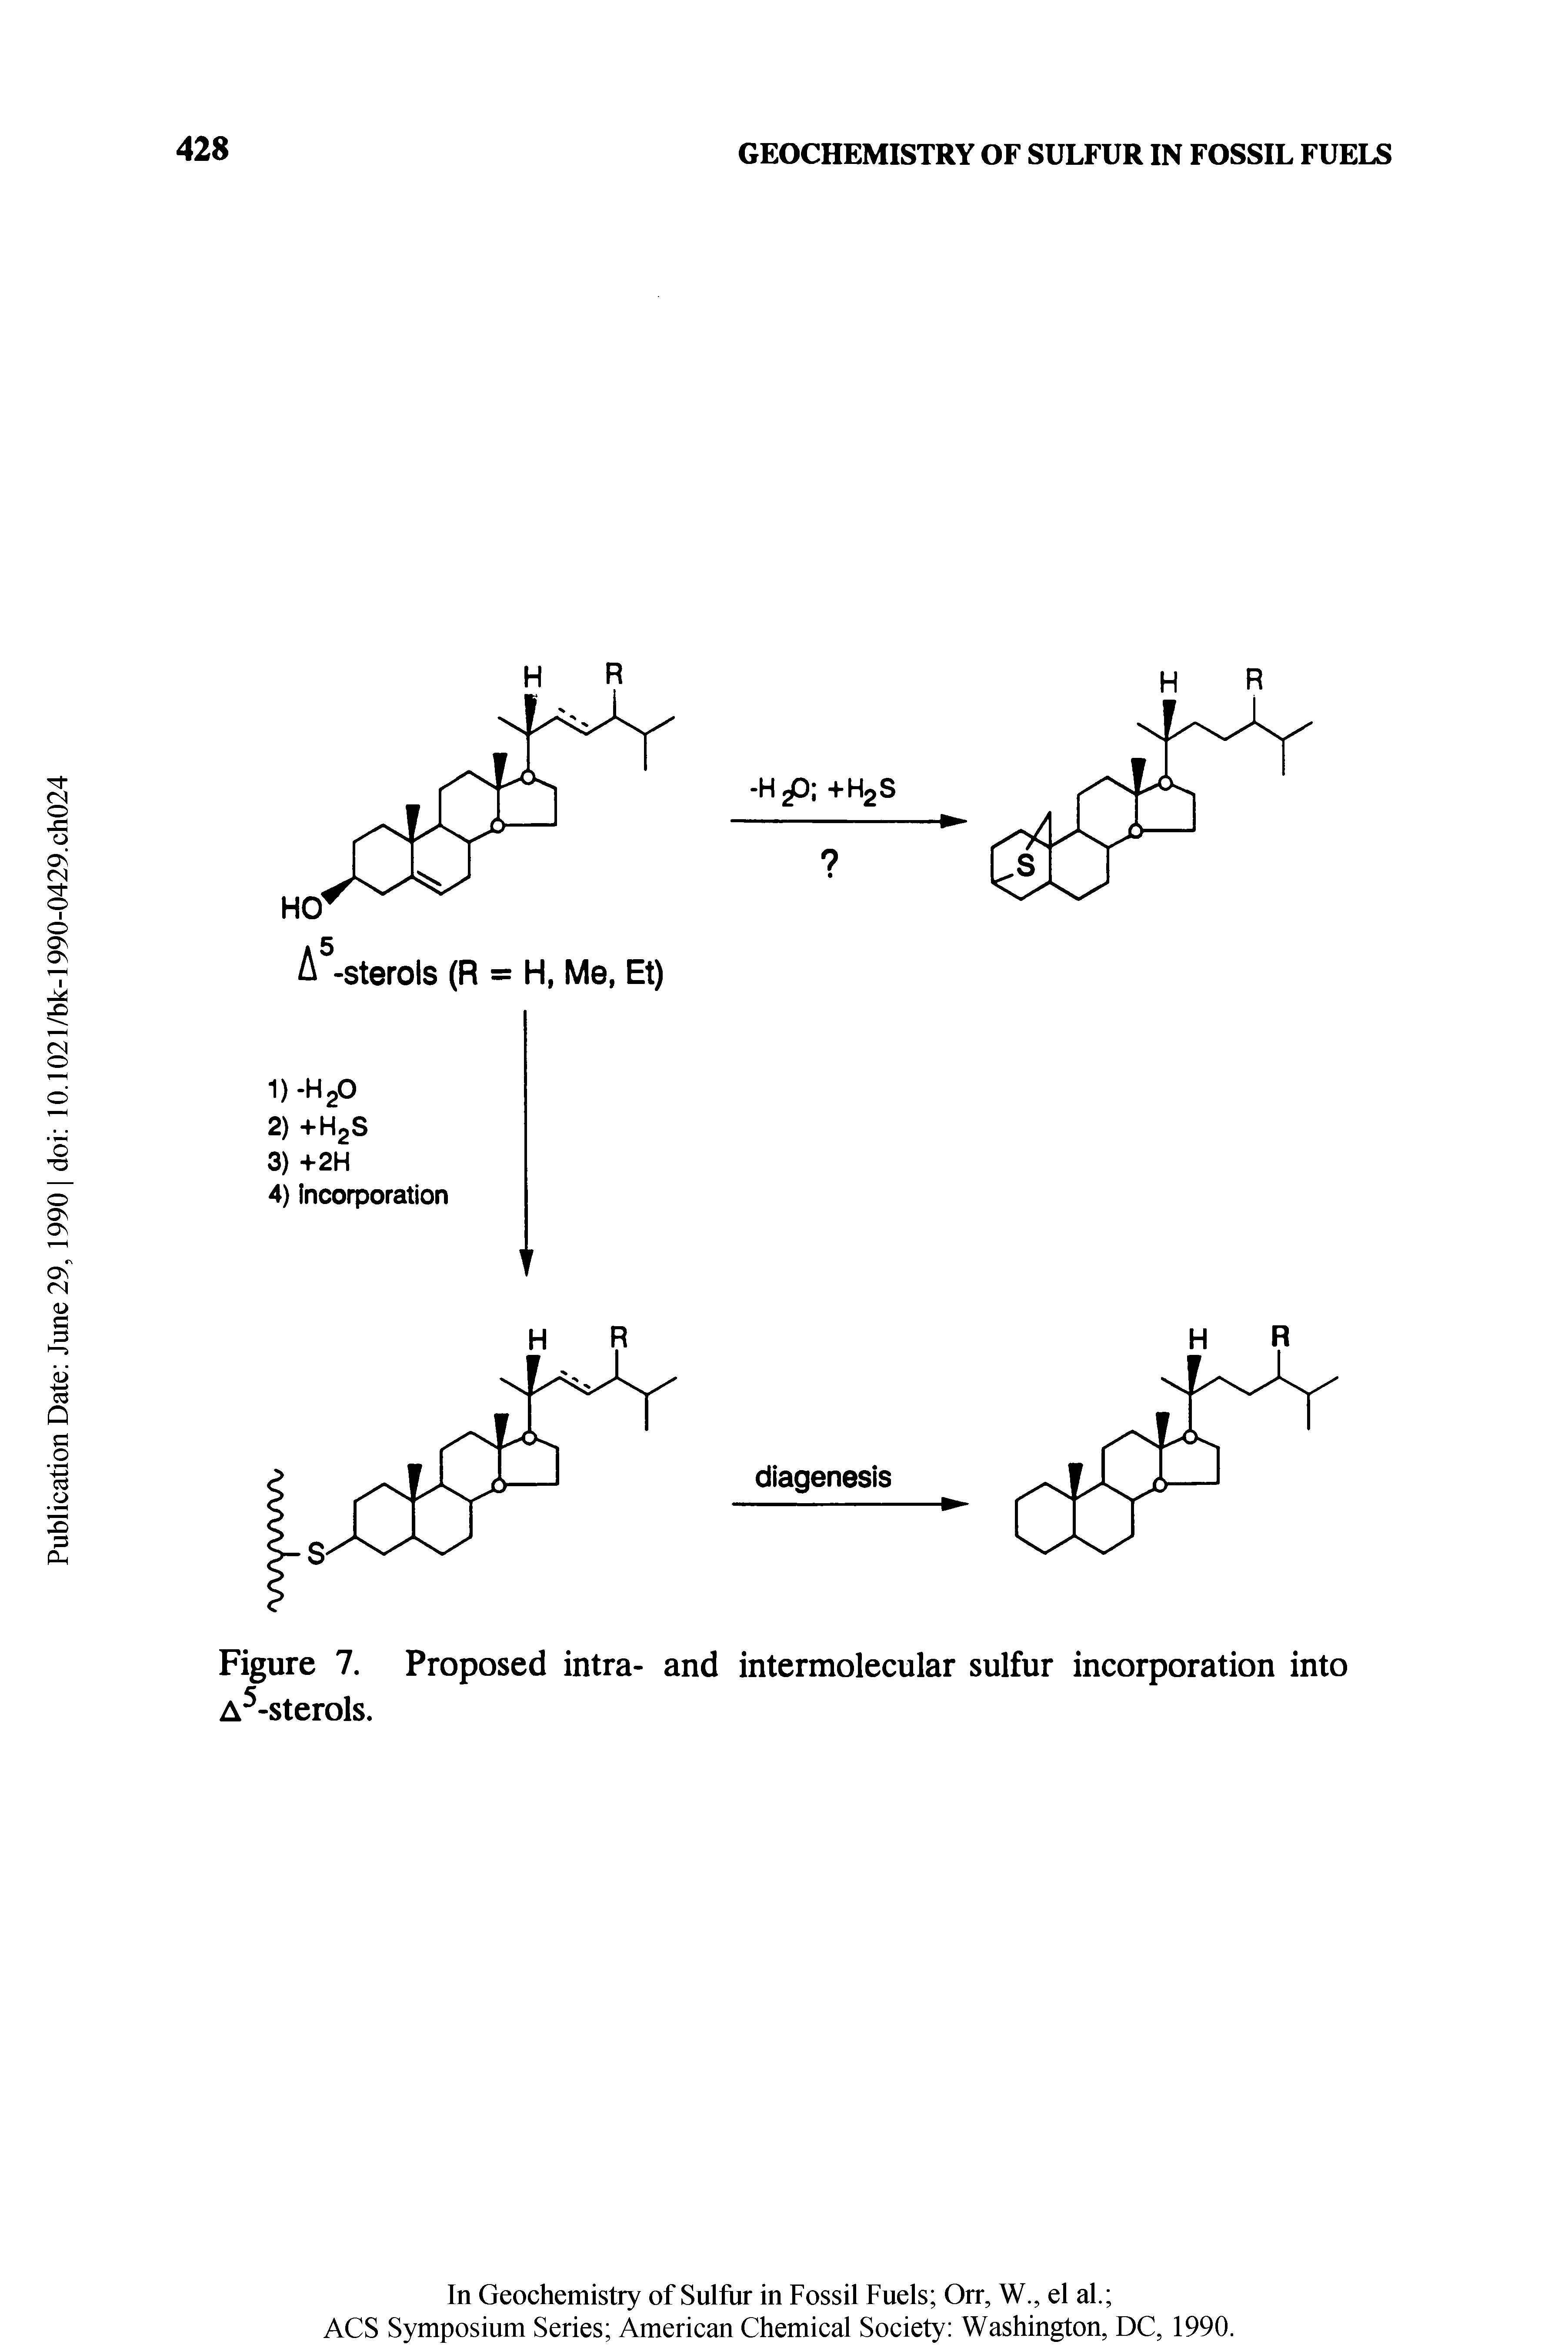 Figure 7. Proposed intra- and intermolecular sulfur incorporation into A5-sterols.